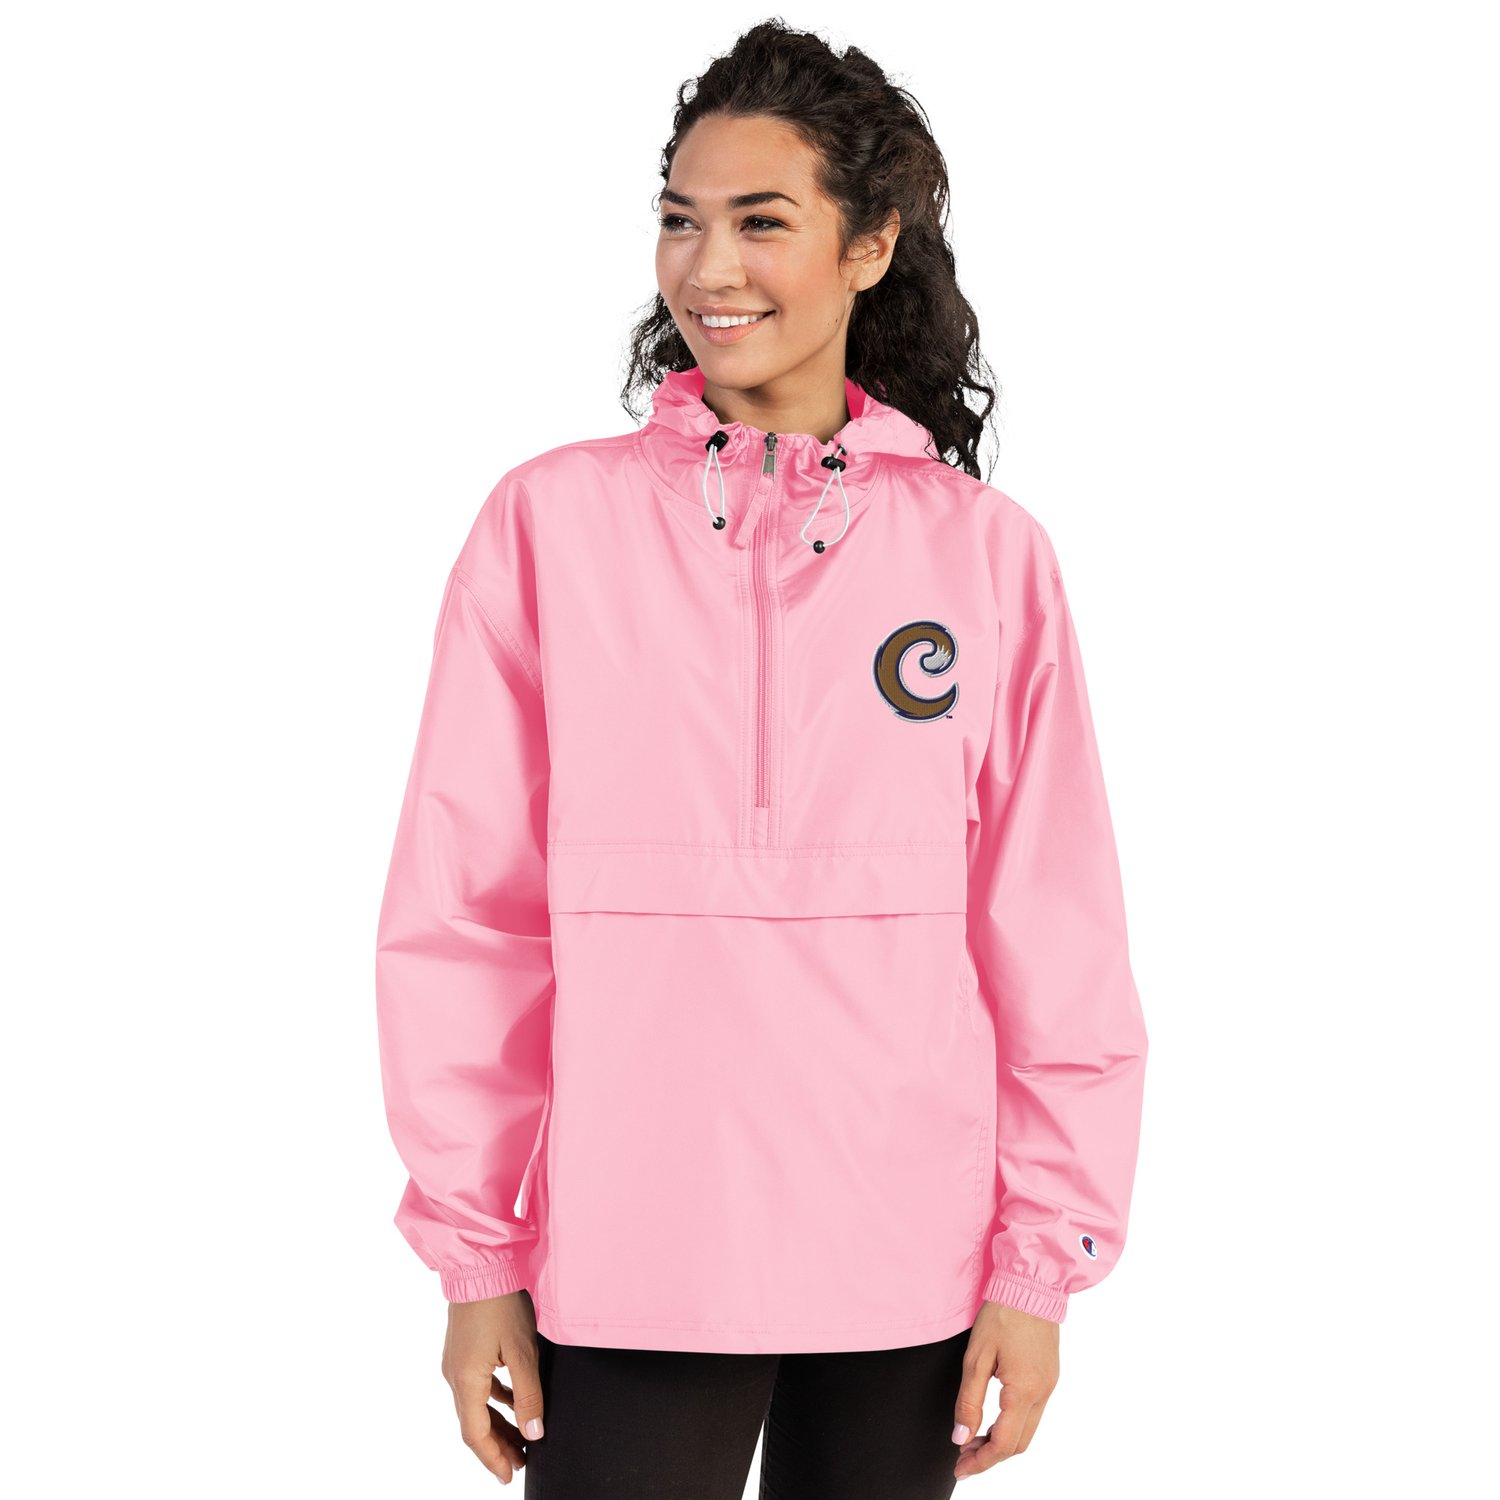 Champion Brand Embroidered Packable Jacket Cougar C Tail Logo